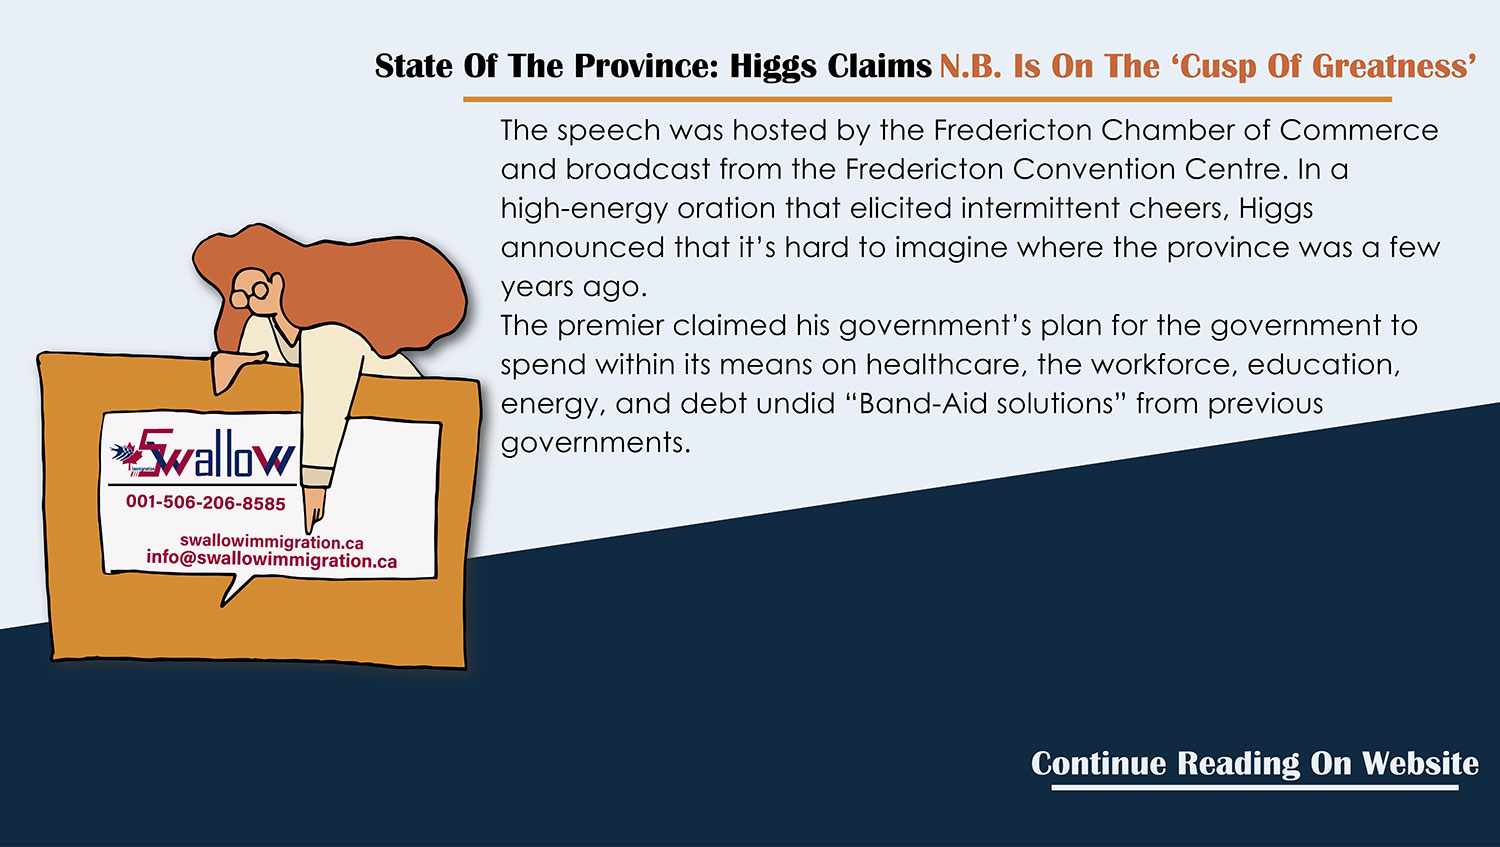 State Of The Province: Higgs Claims N.B. Is On The ‘Cusp Of Greatness’